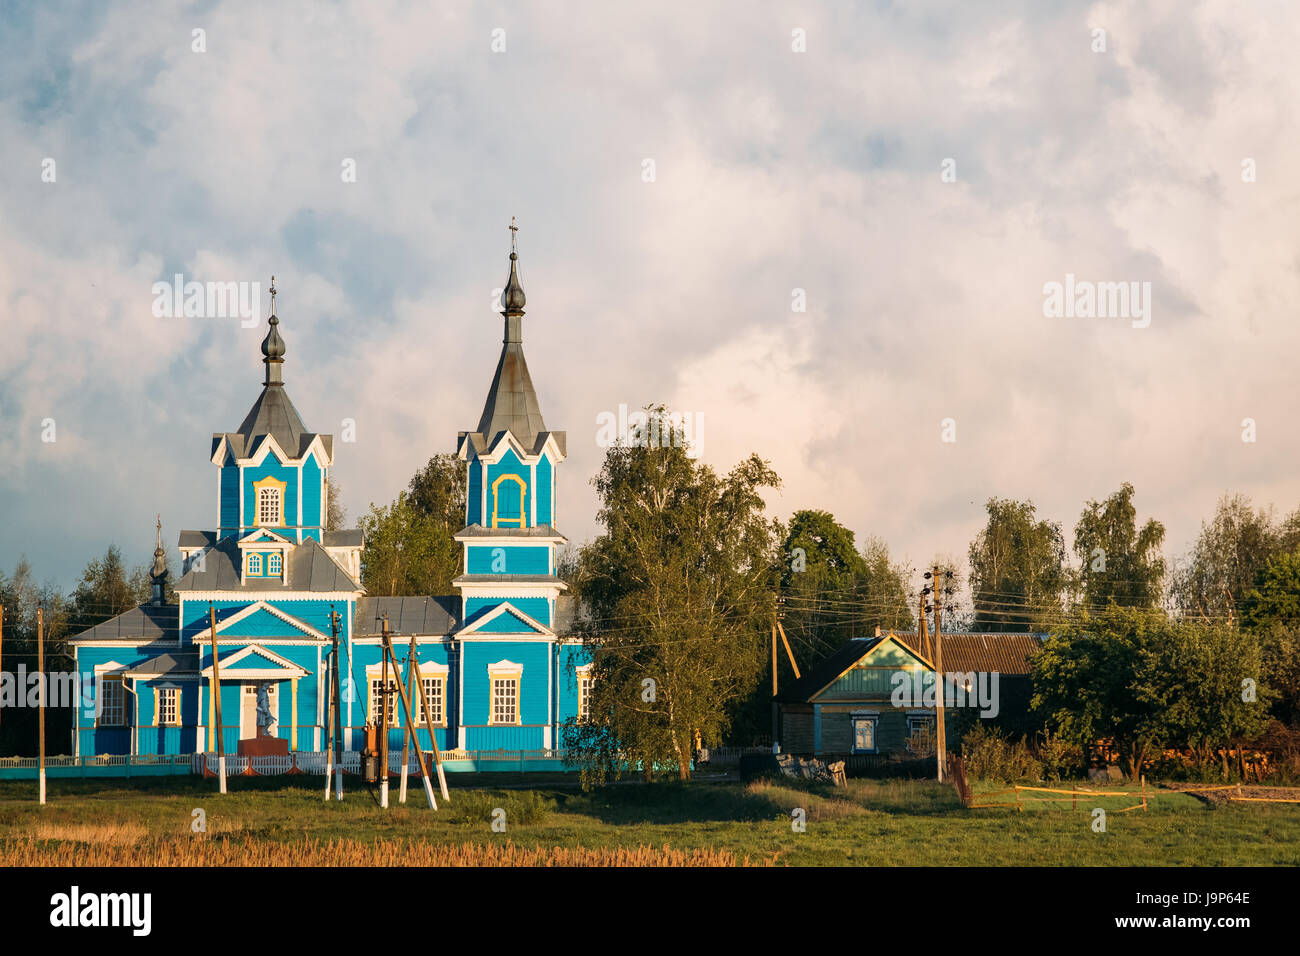 Krasnyy Partizan, Dobrush District, Gomel Region, Belarus. Old Wooden Orthodox Church of the Nativity of the Virgin Mary At Sunset In Village Stock Photo